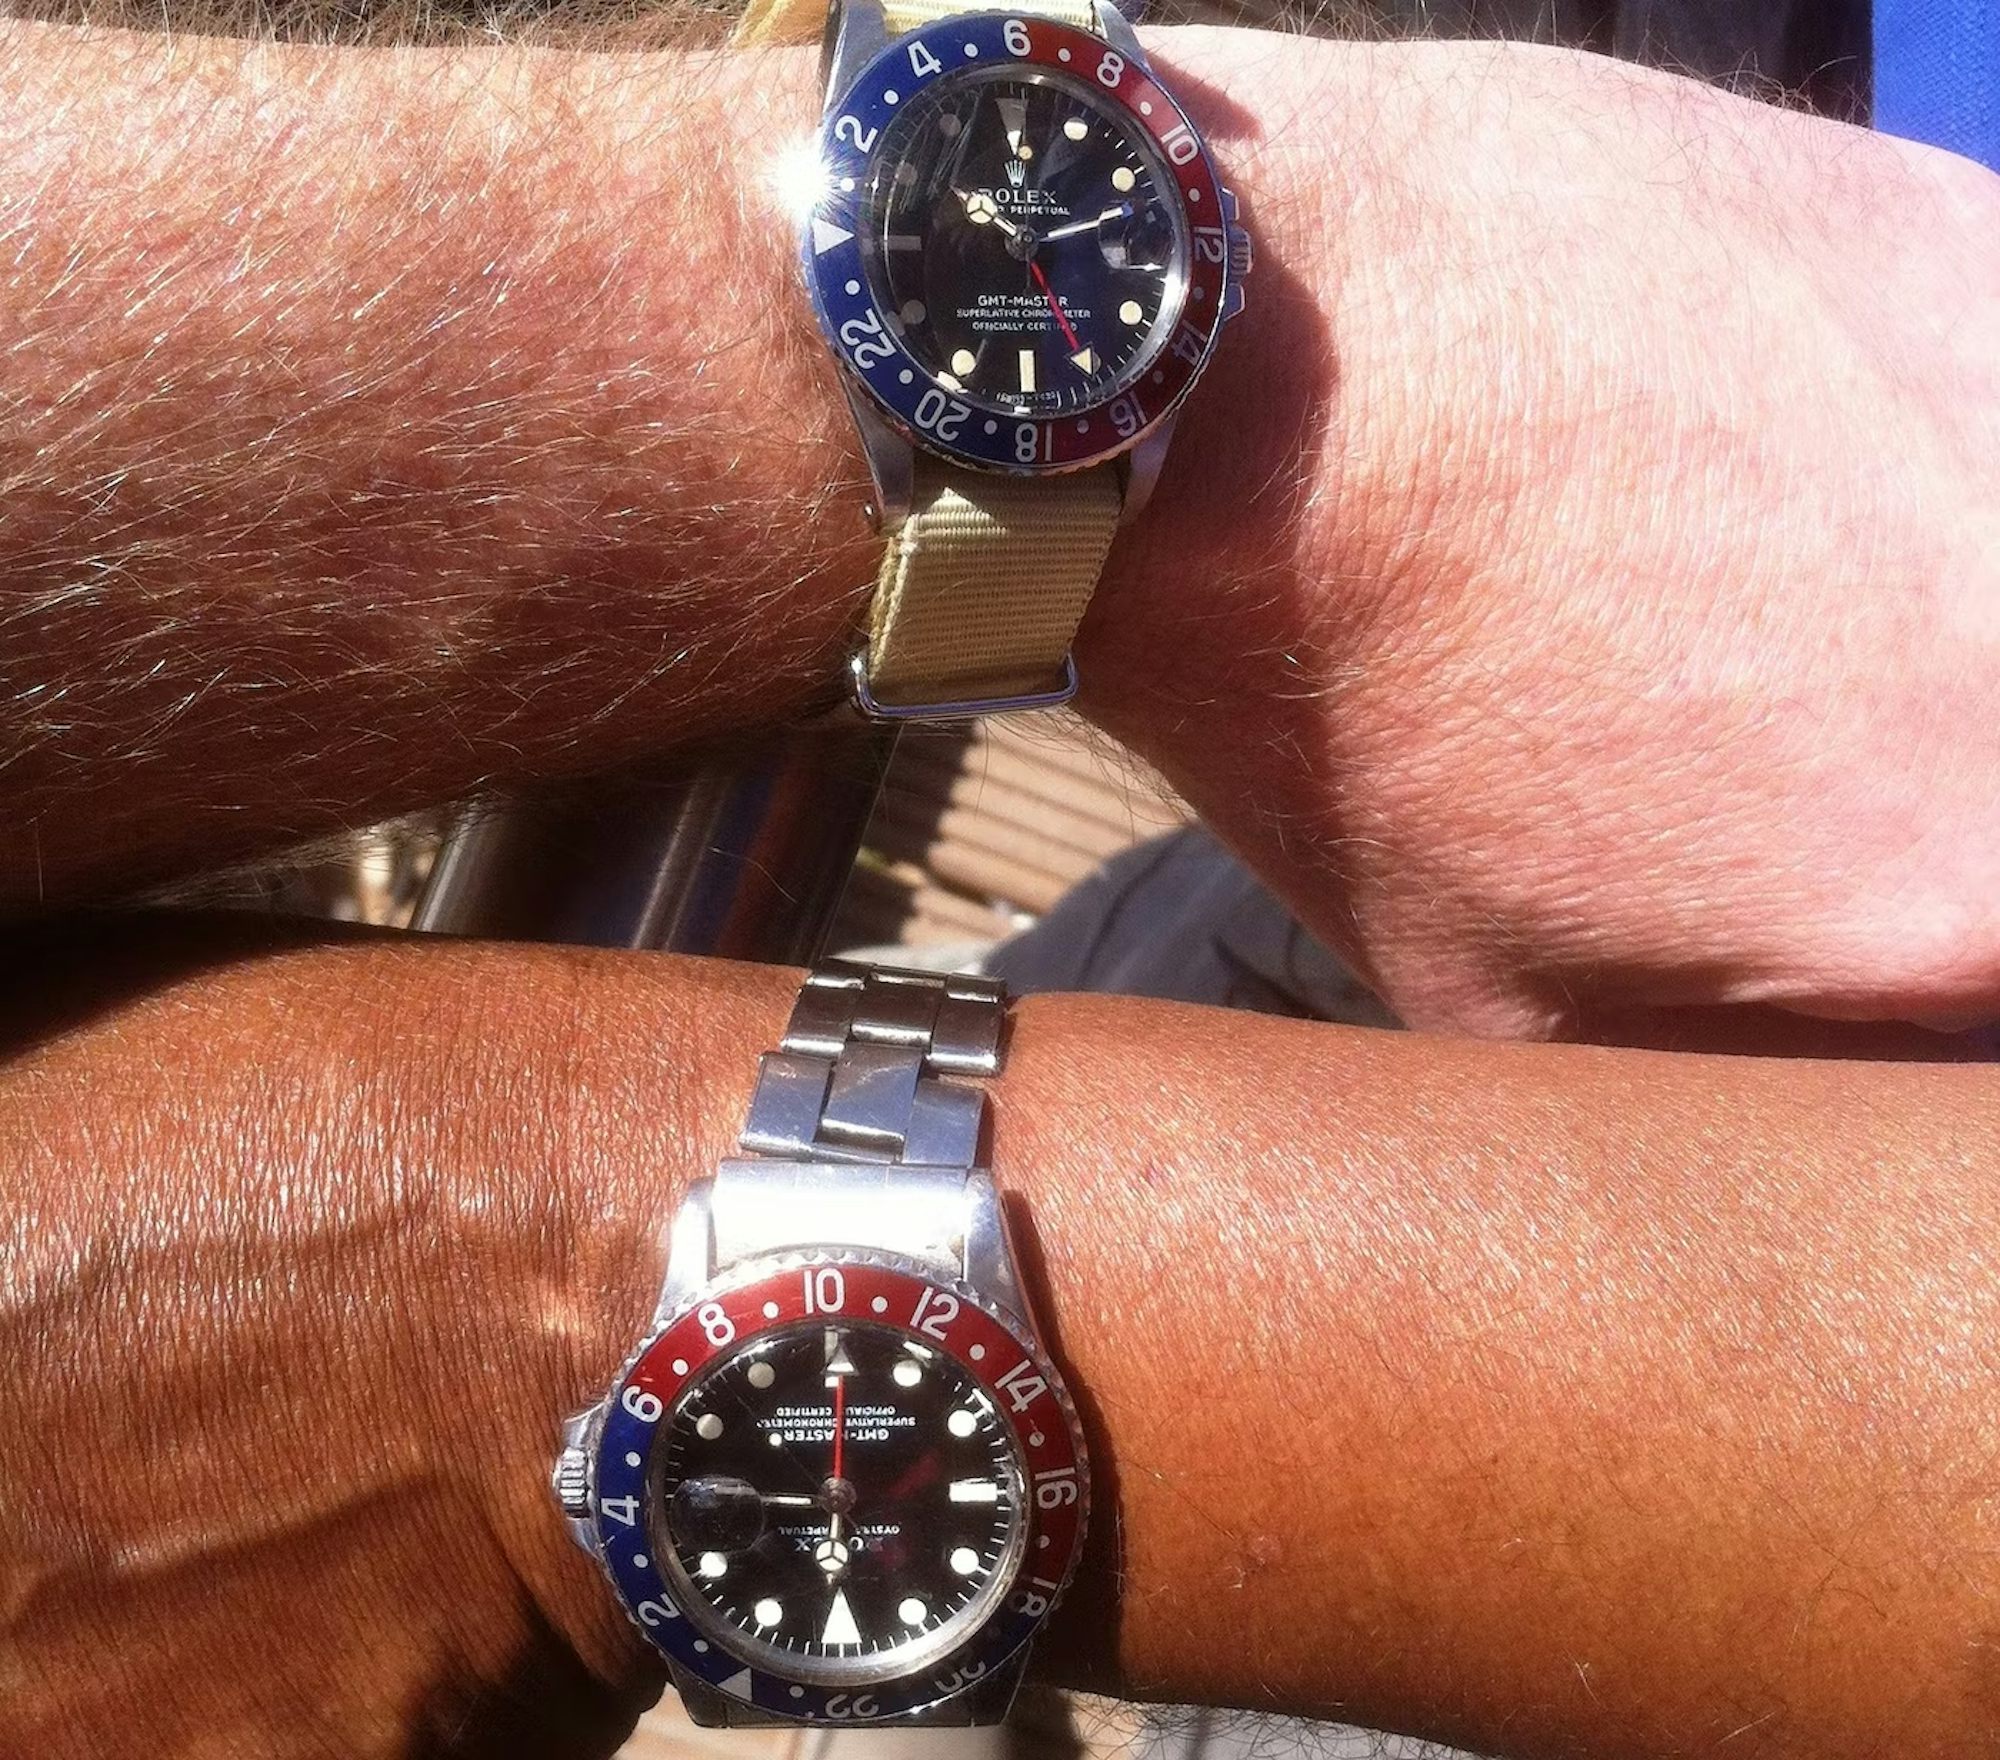 Two GMTs from Jason Heaton's story dreaming of being one watch guy.